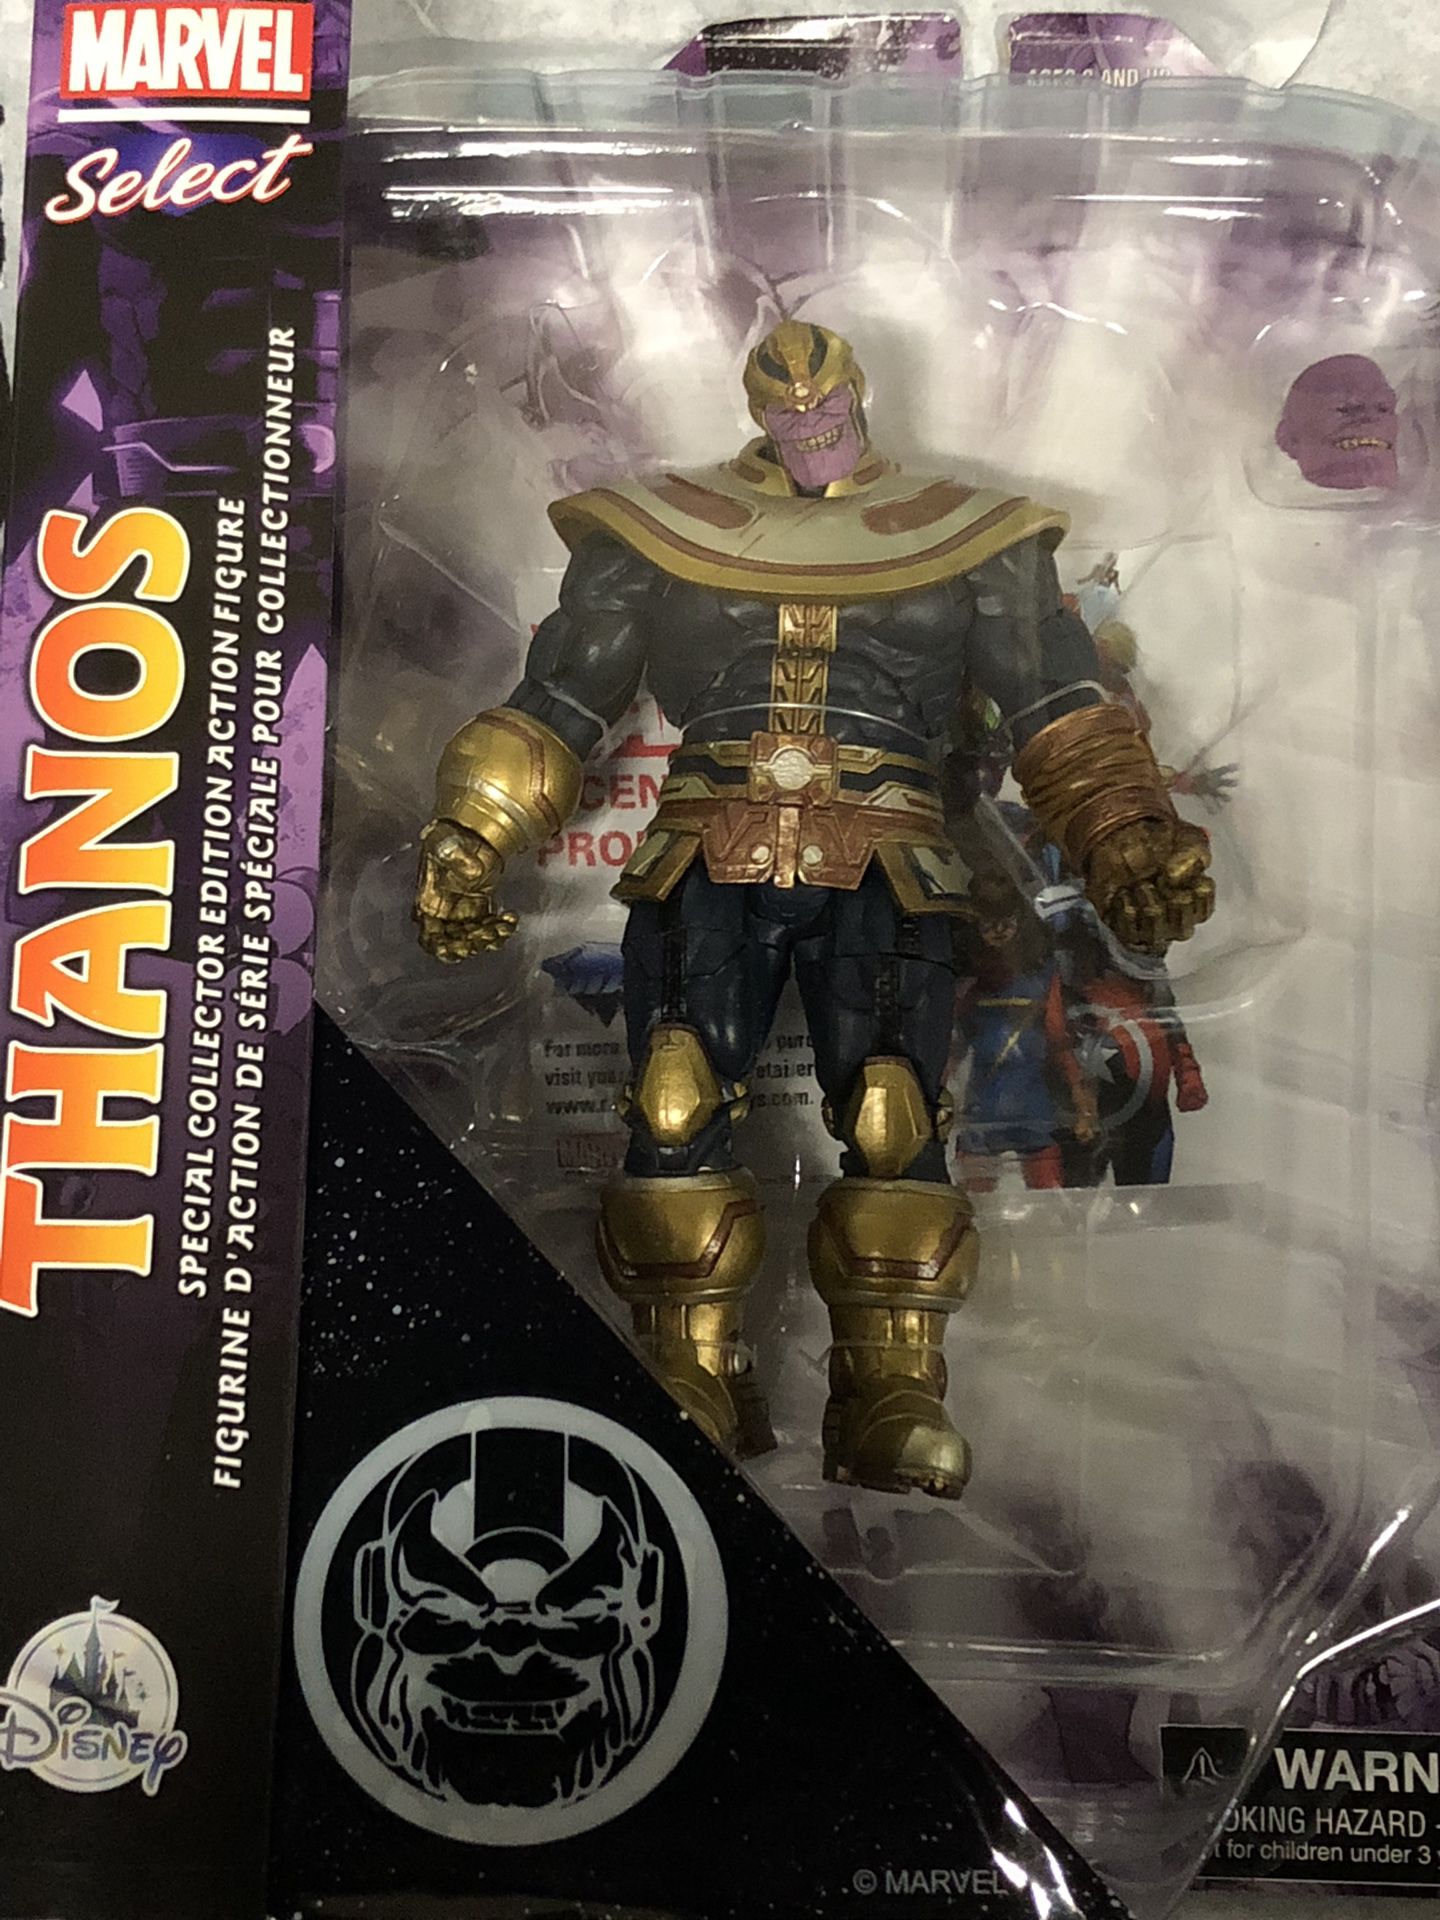 Marvel Select. Thanos Action figure.